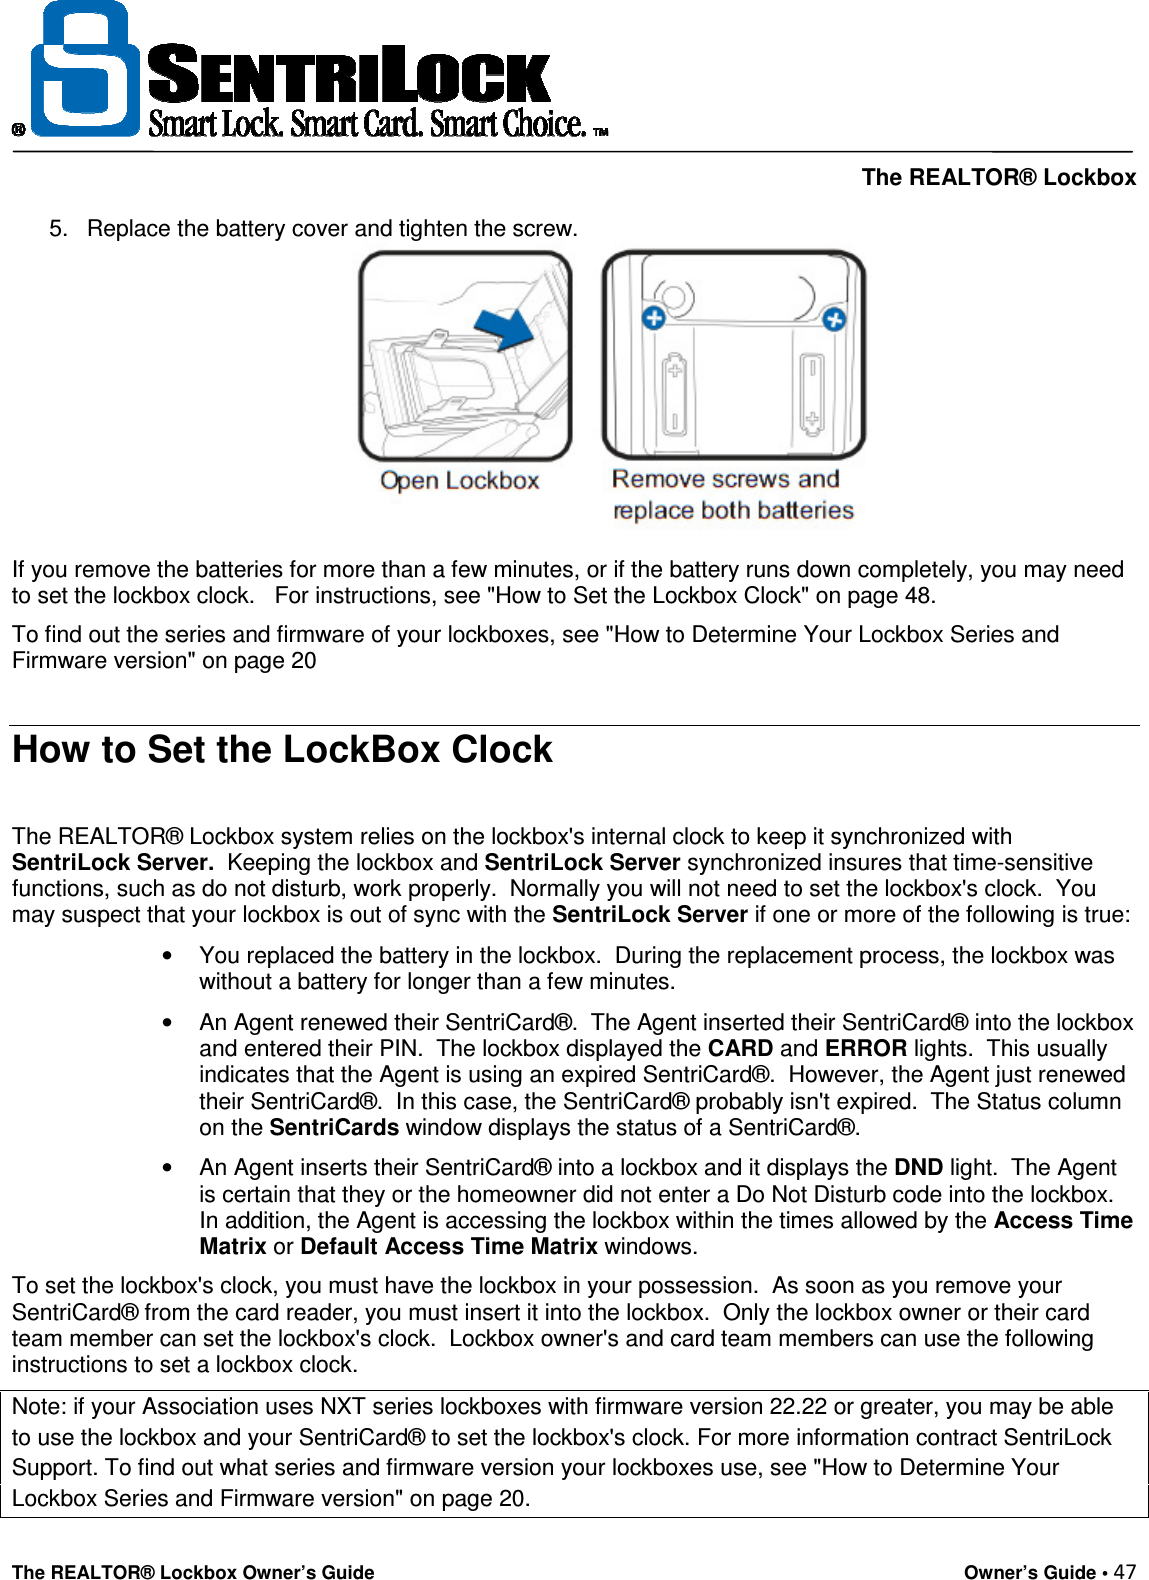     The REALTOR® Lockbox The REALTOR® Lockbox Owner’s Guide    Owner’s Guide • 47  5.  Replace the battery cover and tighten the screw.   If you remove the batteries for more than a few minutes, or if the battery runs down completely, you may need to set the lockbox clock.   For instructions, see &quot;How to Set the Lockbox Clock&quot; on page 48.  To find out the series and firmware of your lockboxes, see &quot;How to Determine Your Lockbox Series and Firmware version&quot; on page 20  How to Set the LockBox Clock  The REALTOR® Lockbox system relies on the lockbox&apos;s internal clock to keep it synchronized with SentriLock Server.  Keeping the lockbox and SentriLock Server synchronized insures that time-sensitive functions, such as do not disturb, work properly.  Normally you will not need to set the lockbox&apos;s clock.  You may suspect that your lockbox is out of sync with the SentriLock Server if one or more of the following is true:  •  You replaced the battery in the lockbox.  During the replacement process, the lockbox was without a battery for longer than a few minutes.  •  An Agent renewed their SentriCard®.  The Agent inserted their SentriCard® into the lockbox and entered their PIN.  The lockbox displayed the CARD and ERROR lights.  This usually indicates that the Agent is using an expired SentriCard®.  However, the Agent just renewed their SentriCard®.  In this case, the SentriCard® probably isn&apos;t expired.  The Status column on the SentriCards window displays the status of a SentriCard®.  •  An Agent inserts their SentriCard® into a lockbox and it displays the DND light.  The Agent is certain that they or the homeowner did not enter a Do Not Disturb code into the lockbox.  In addition, the Agent is accessing the lockbox within the times allowed by the Access Time Matrix or Default Access Time Matrix windows.  To set the lockbox&apos;s clock, you must have the lockbox in your possession.  As soon as you remove your SentriCard® from the card reader, you must insert it into the lockbox.  Only the lockbox owner or their card team member can set the lockbox&apos;s clock.  Lockbox owner&apos;s and card team members can use the following instructions to set a lockbox clock. Note: if your Association uses NXT series lockboxes with firmware version 22.22 or greater, you may be able to use the lockbox and your SentriCard® to set the lockbox&apos;s clock. For more information contract SentriLock Support. To find out what series and firmware version your lockboxes use, see &quot;How to Determine Your Lockbox Series and Firmware version&quot; on page 20. 